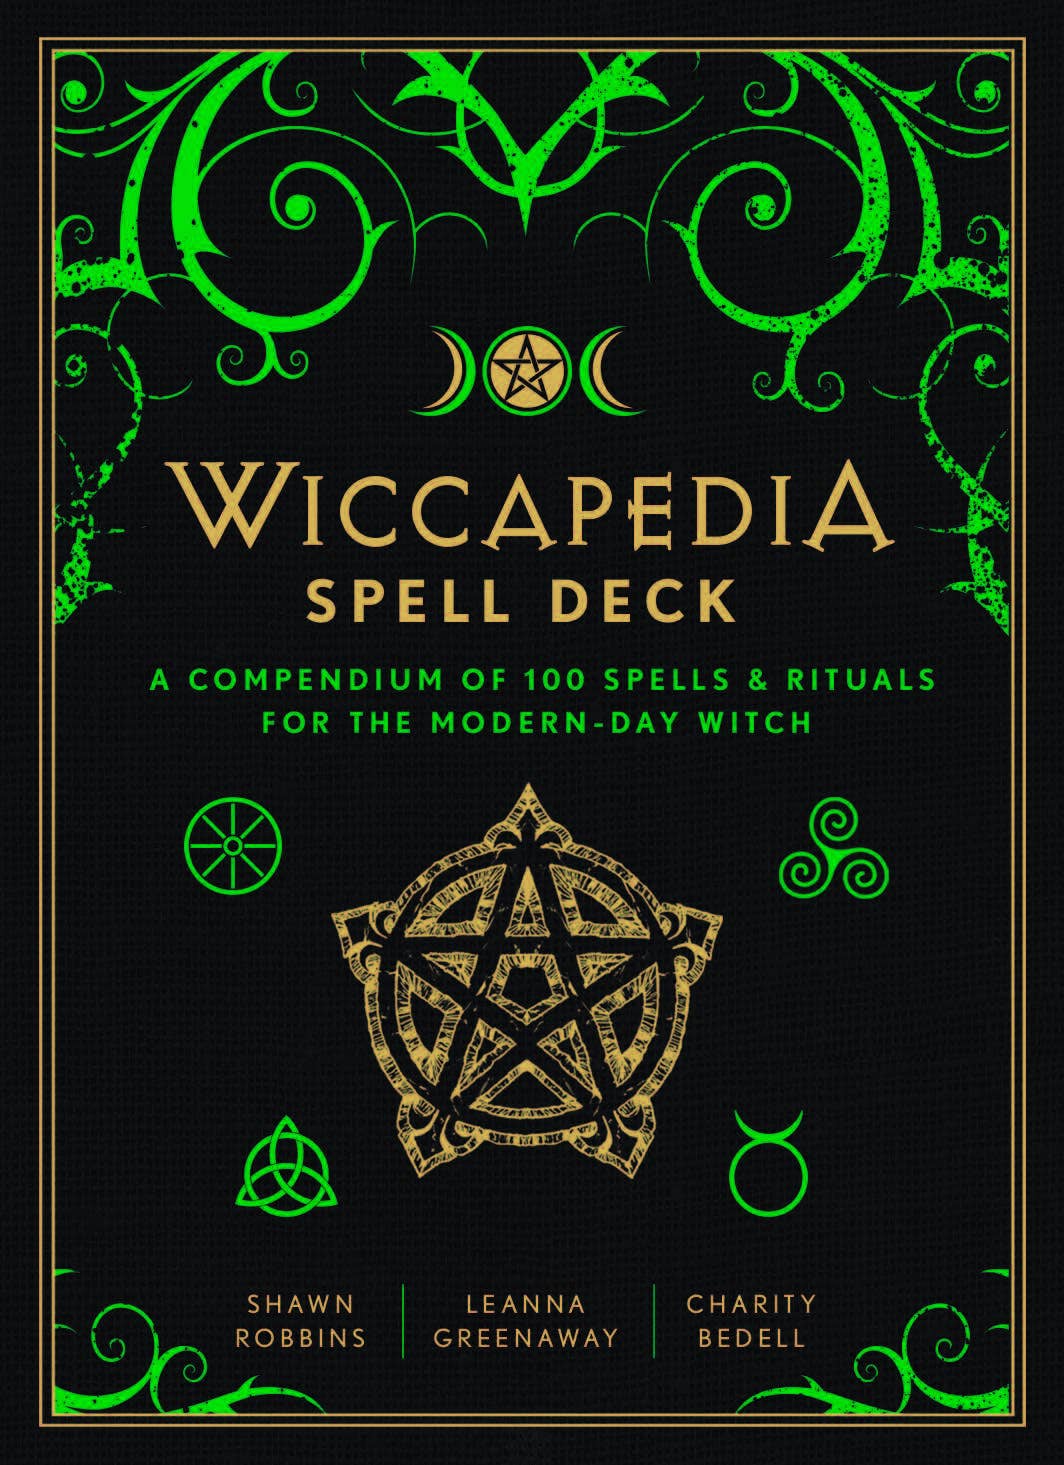 Wiccapedia Spell Deck by Leanna Greenaway